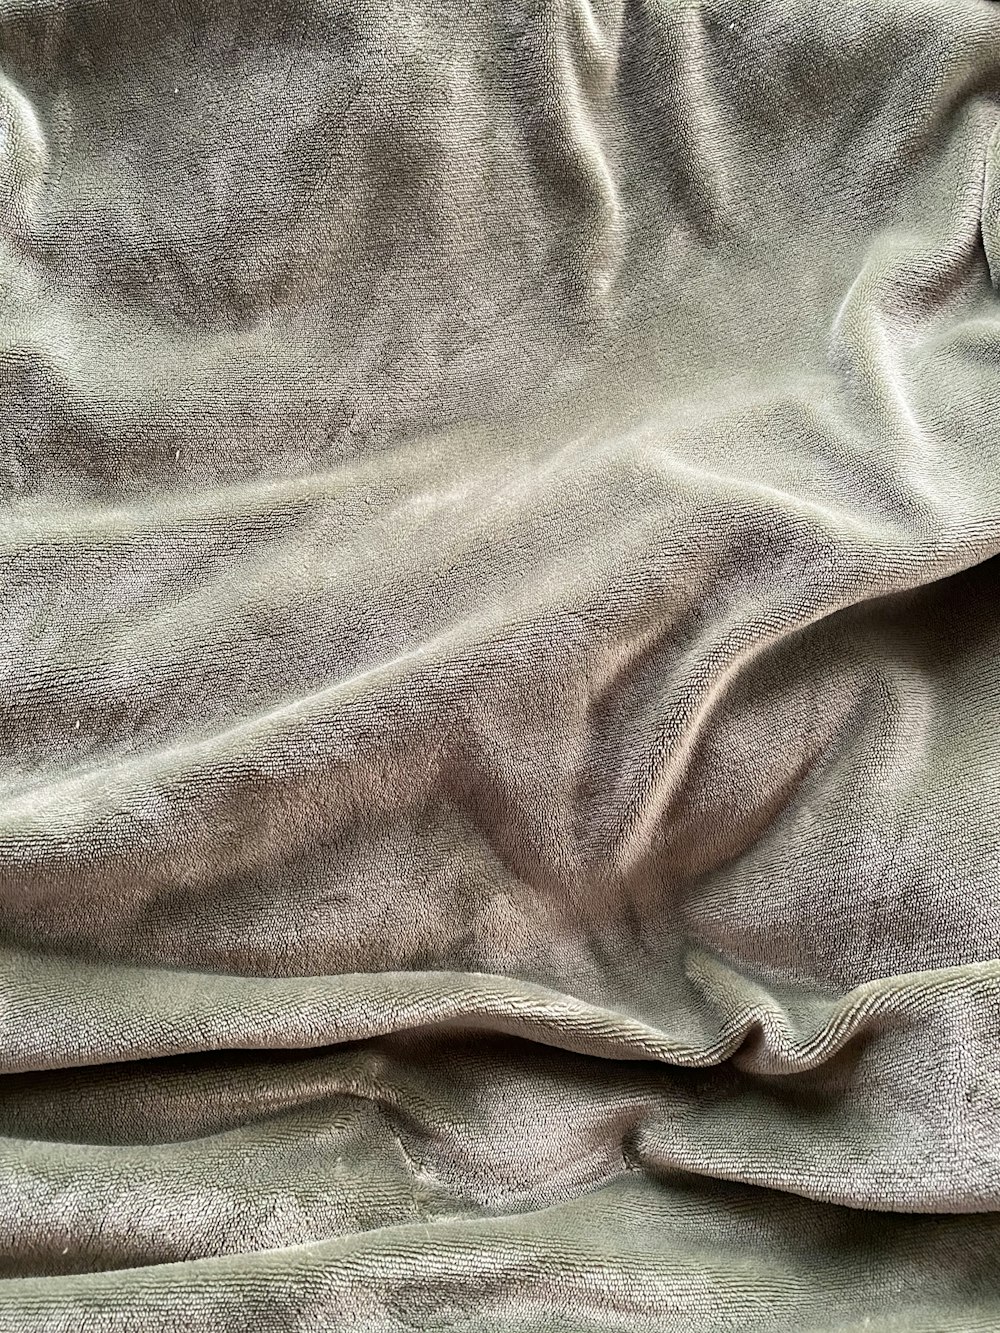 gray textile on brown wooden table